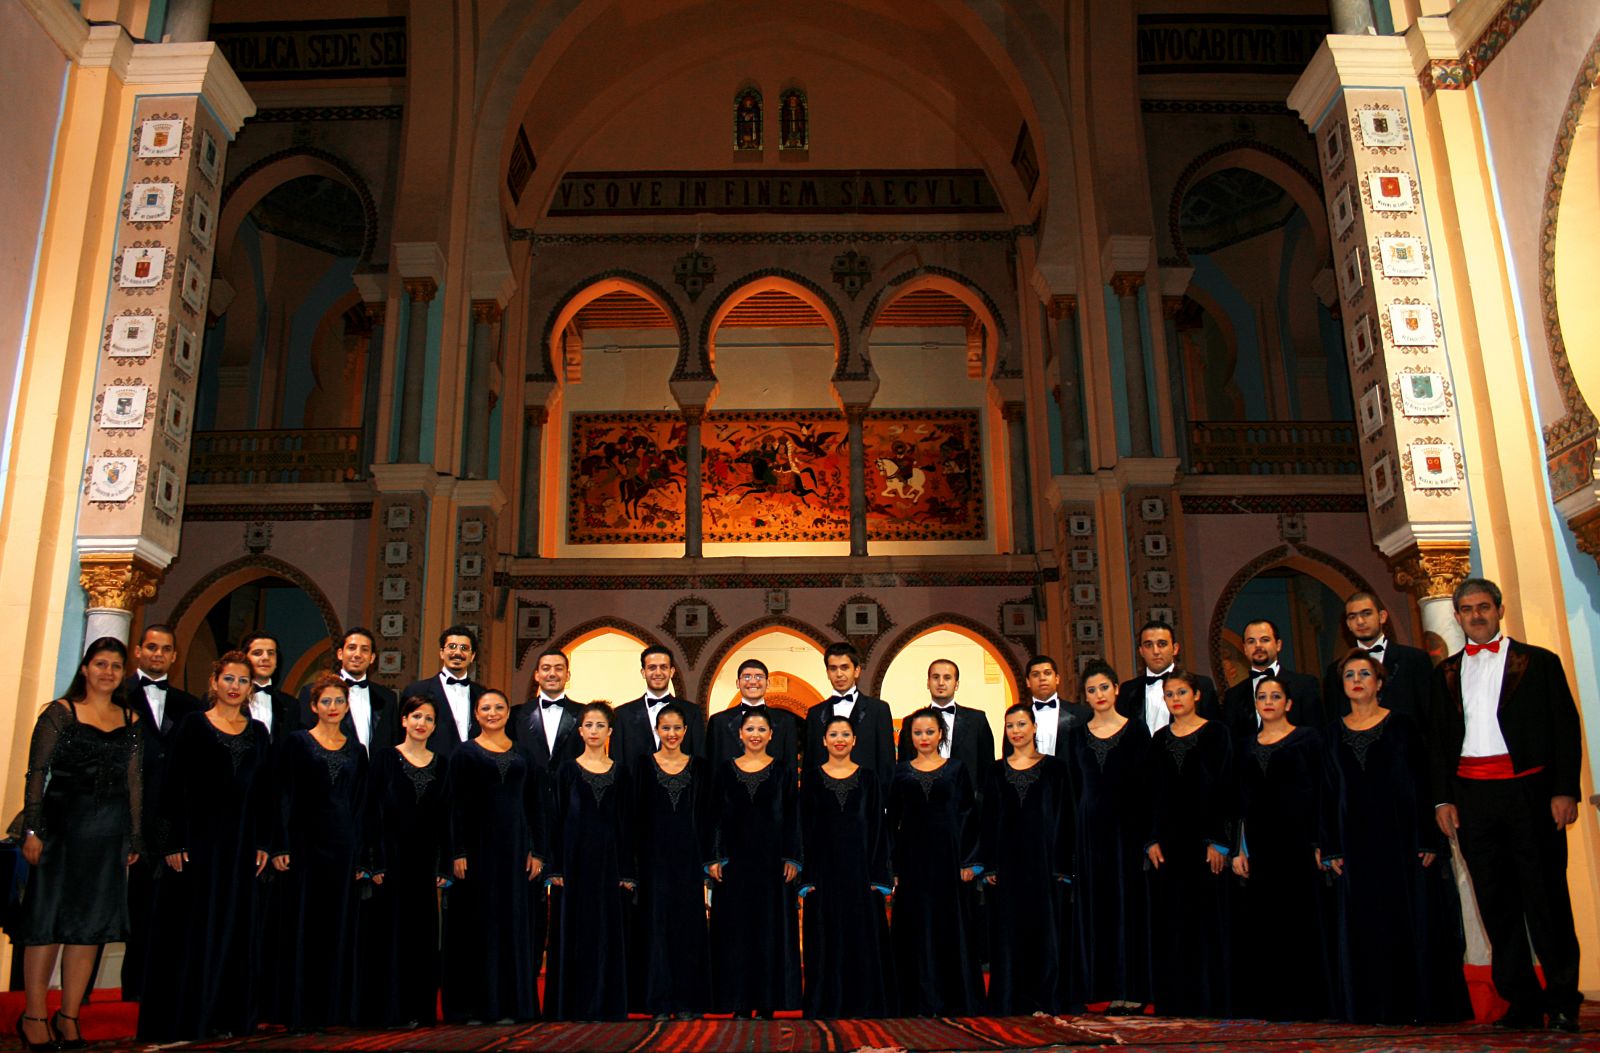 “Fayha”, Arabic for “fragrant,” celebrates the world’s diverse musical heritage through a rich repertoire spanning several eras and traditions, including Lebanese, Syrian, Egyptian, Palestinian, Iraqi, Bedouin, and Andalusian. They also perform songs in French, English, Latin, Armenian, and other languages. (Photo:fayhachoir.org)